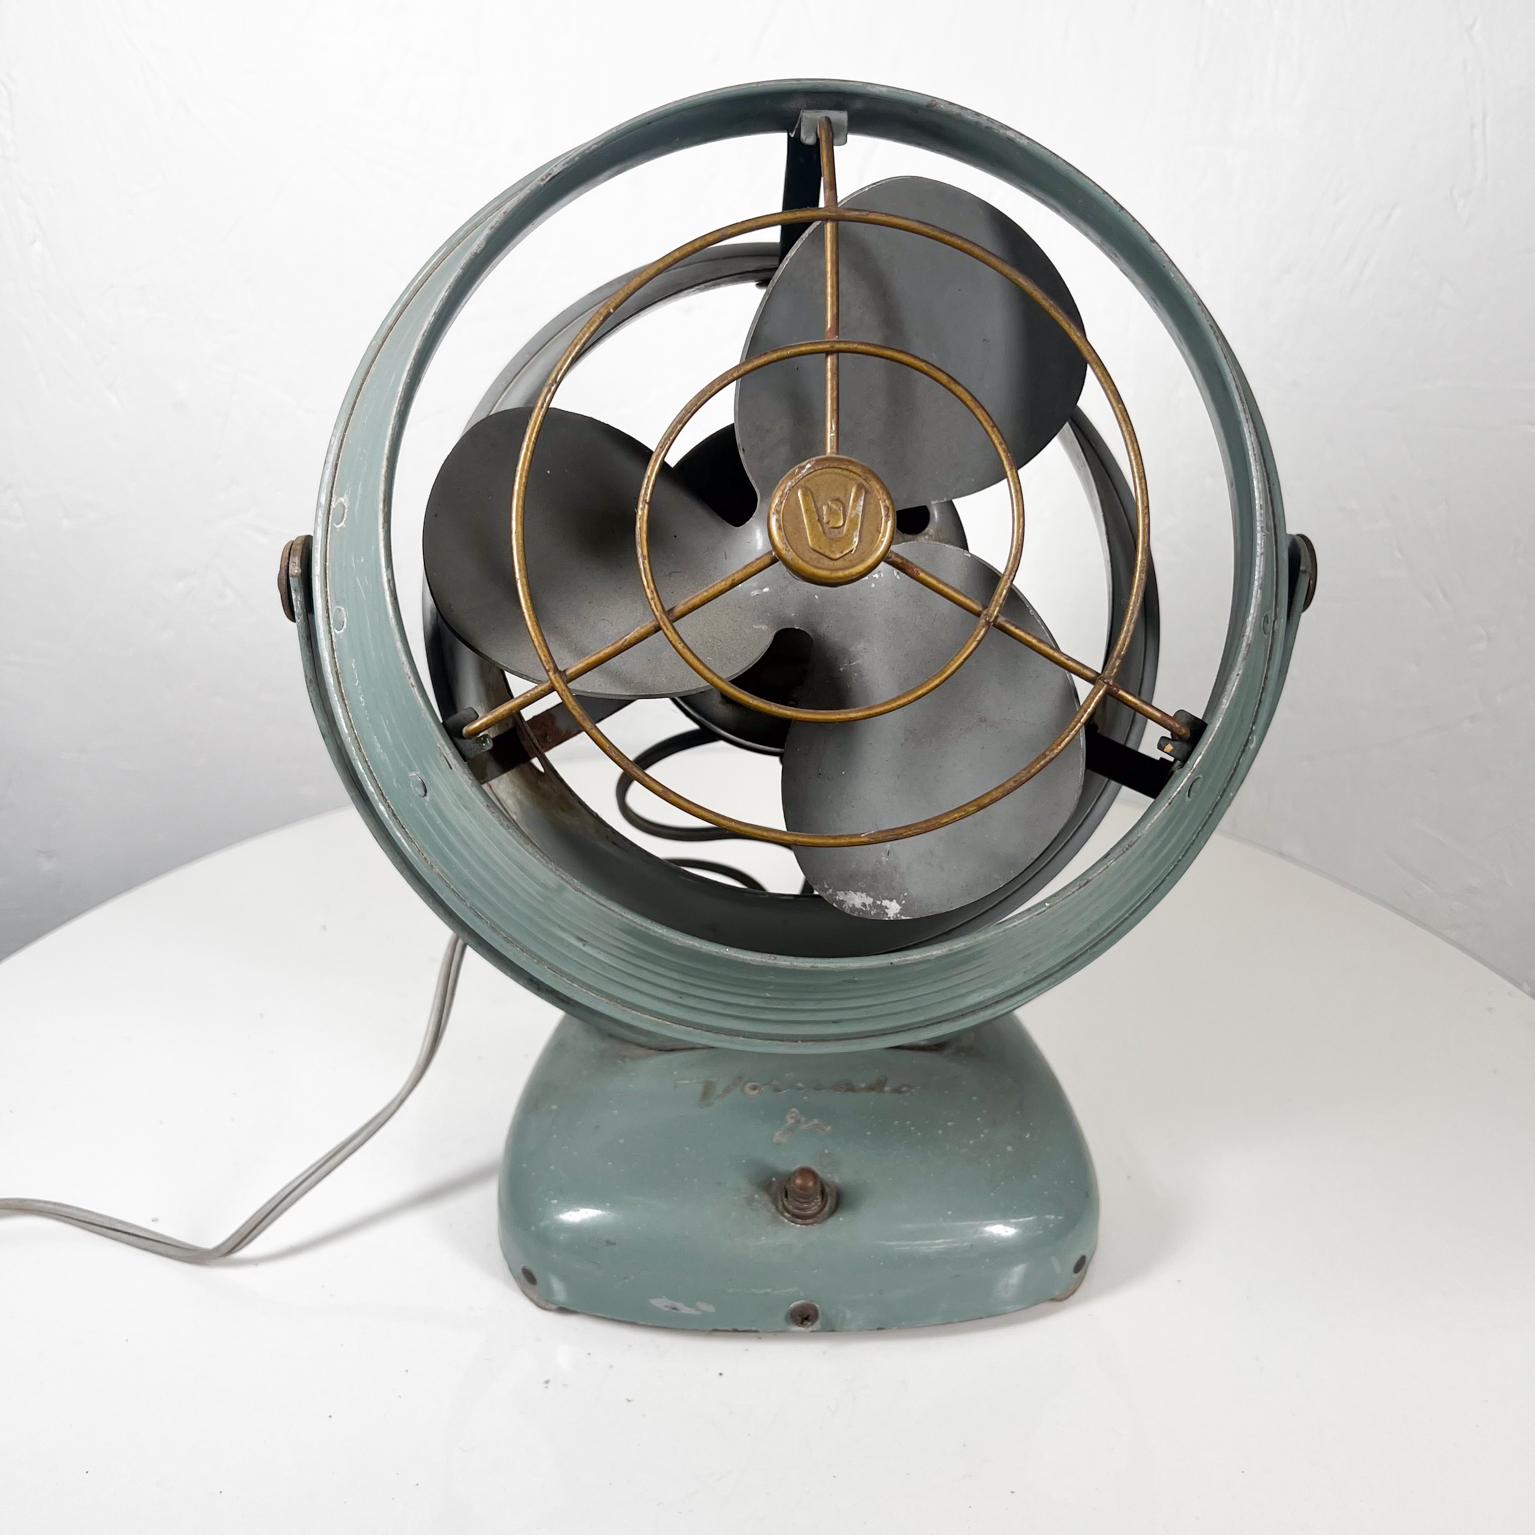 1940s Vornado vintage antique electric fan
powerful and silent
Stamped by maker
Art Deco era electric green desk tabletop fan
modern industrial design.
16 tall x 16 d x 24 w
Preowned original vintage condition. Rust present. Faded finish.
Refer to